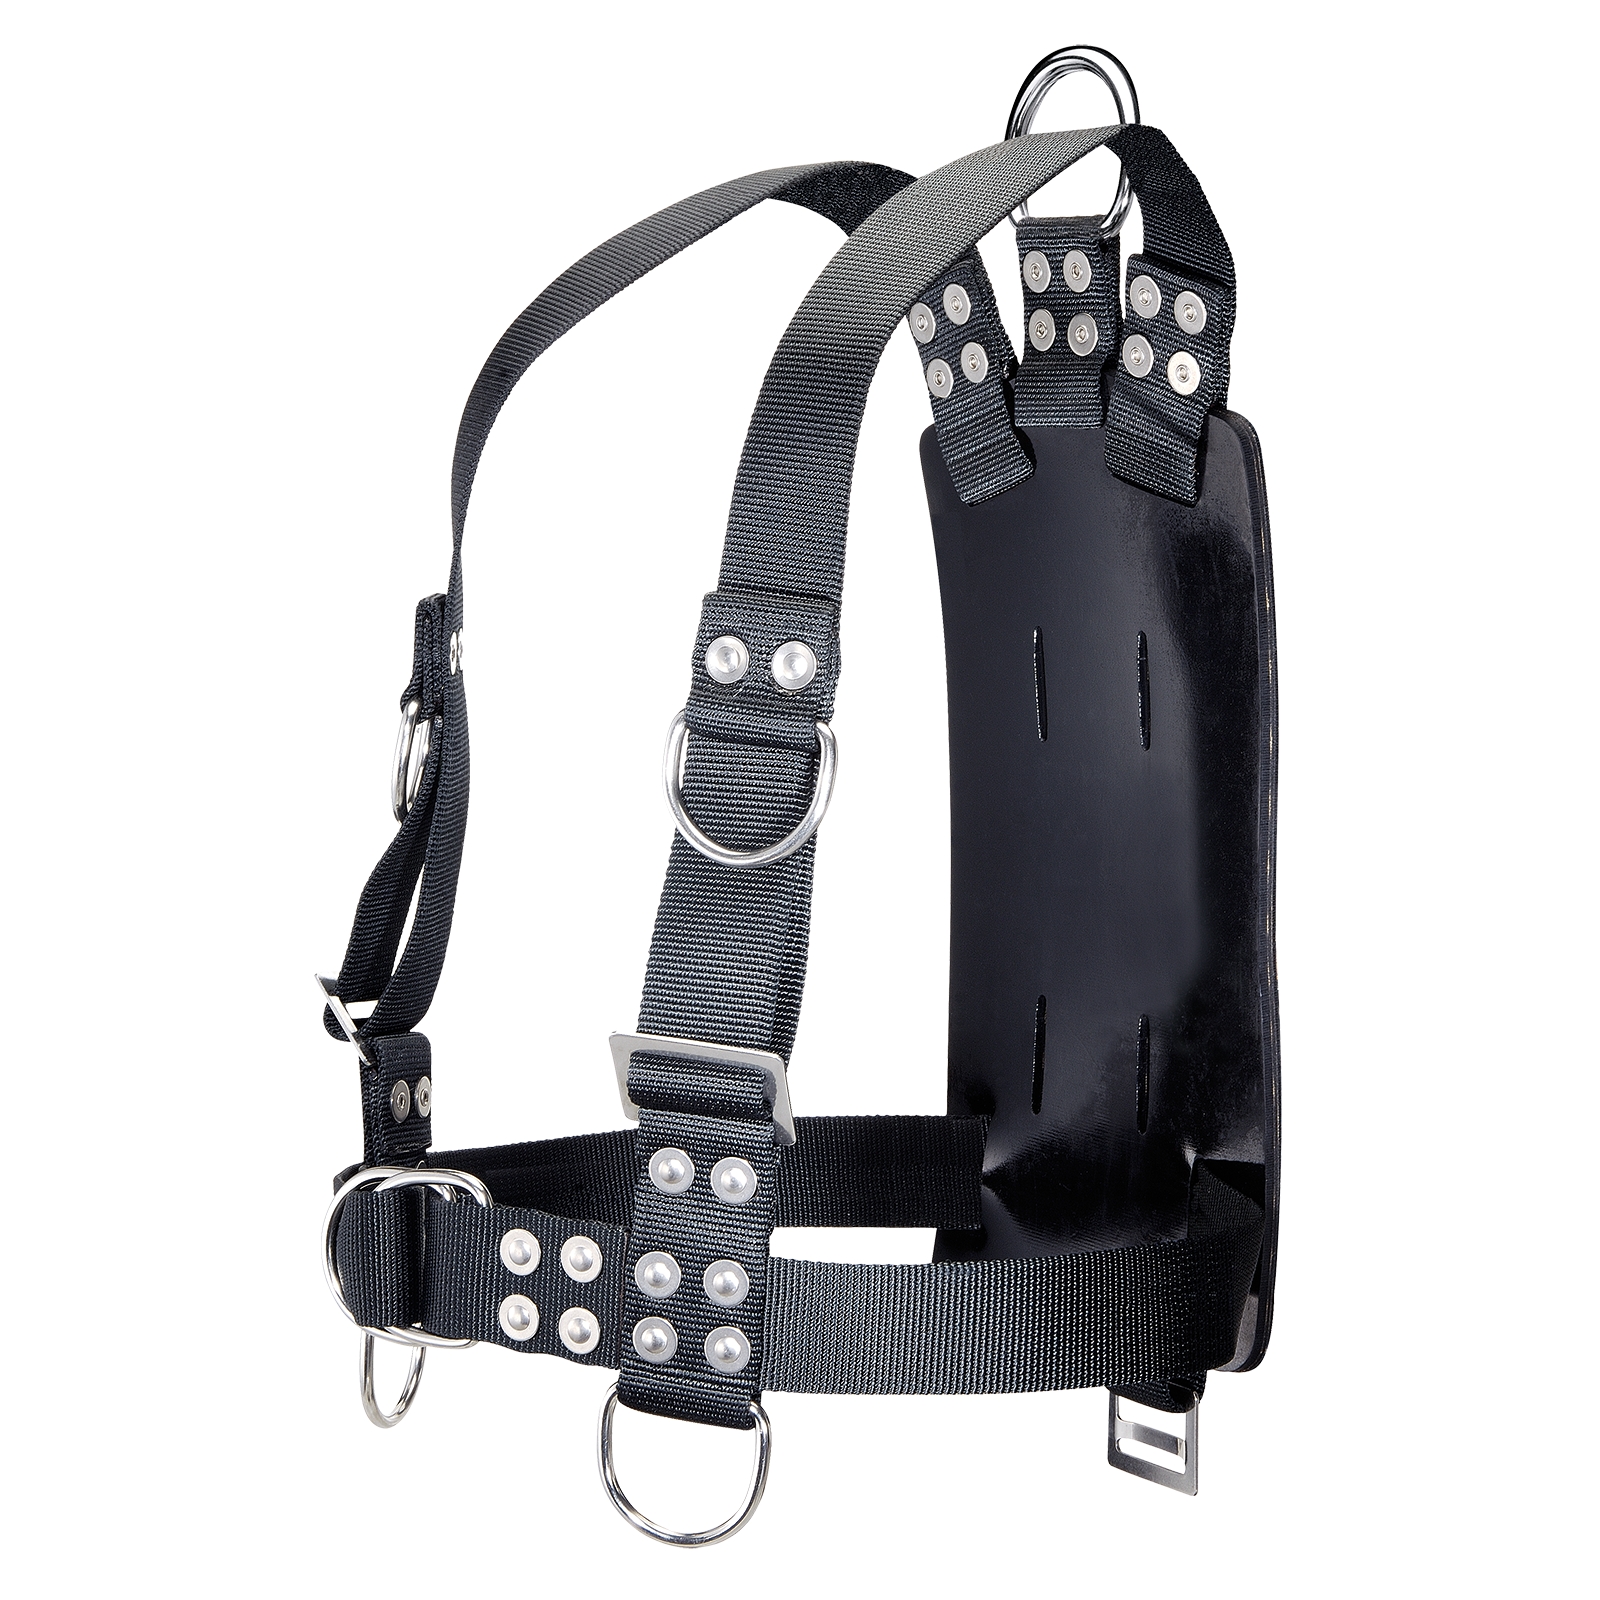 HHBP-I Commercial Diving Bell Harness